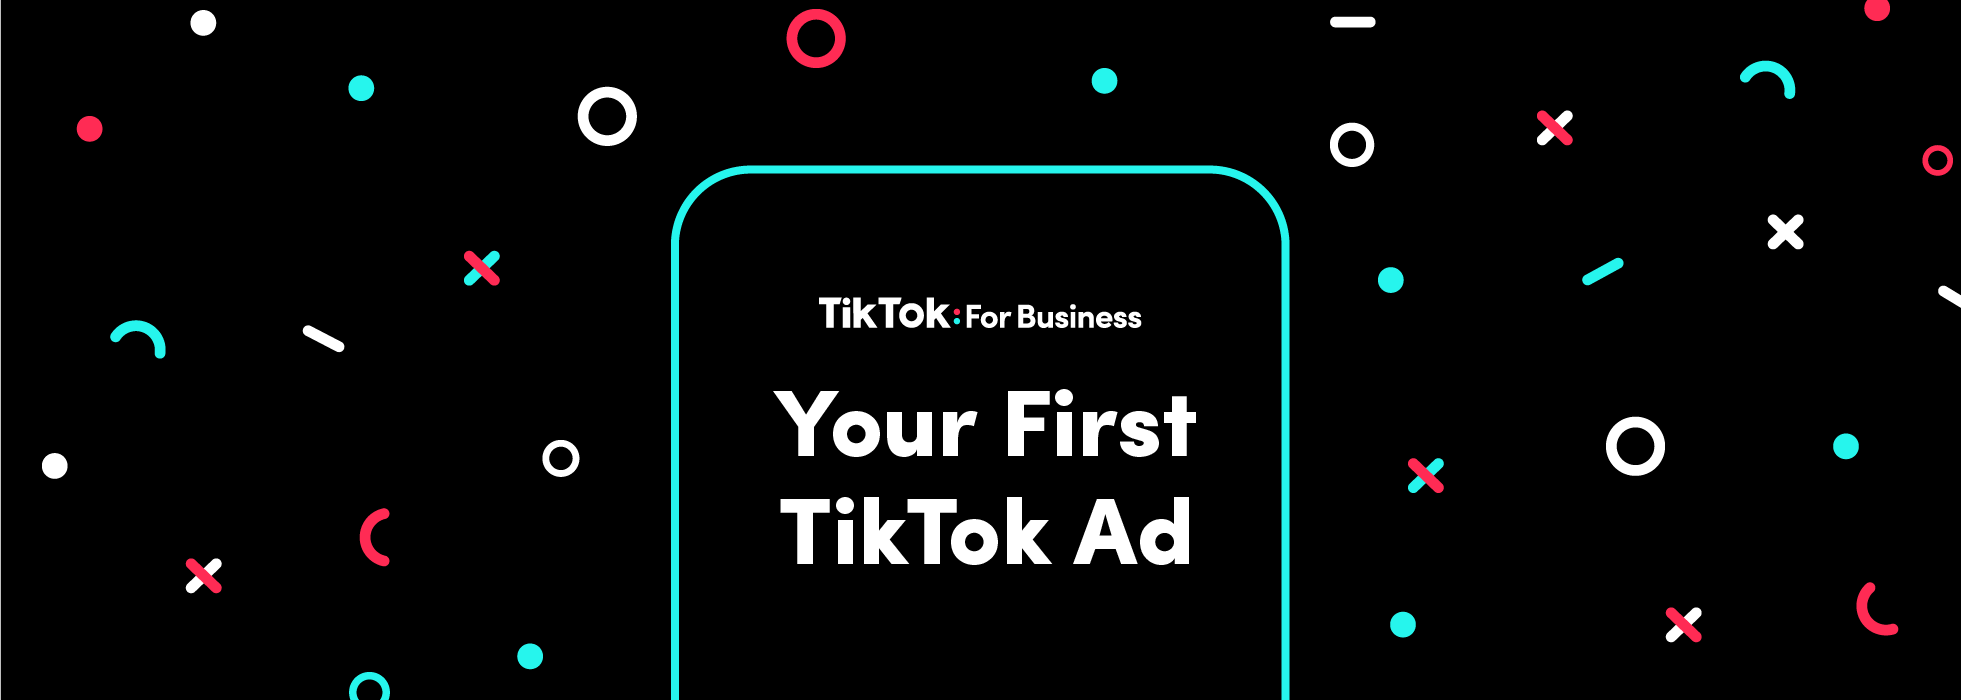 Your guide to creating your first TikTok promotion 